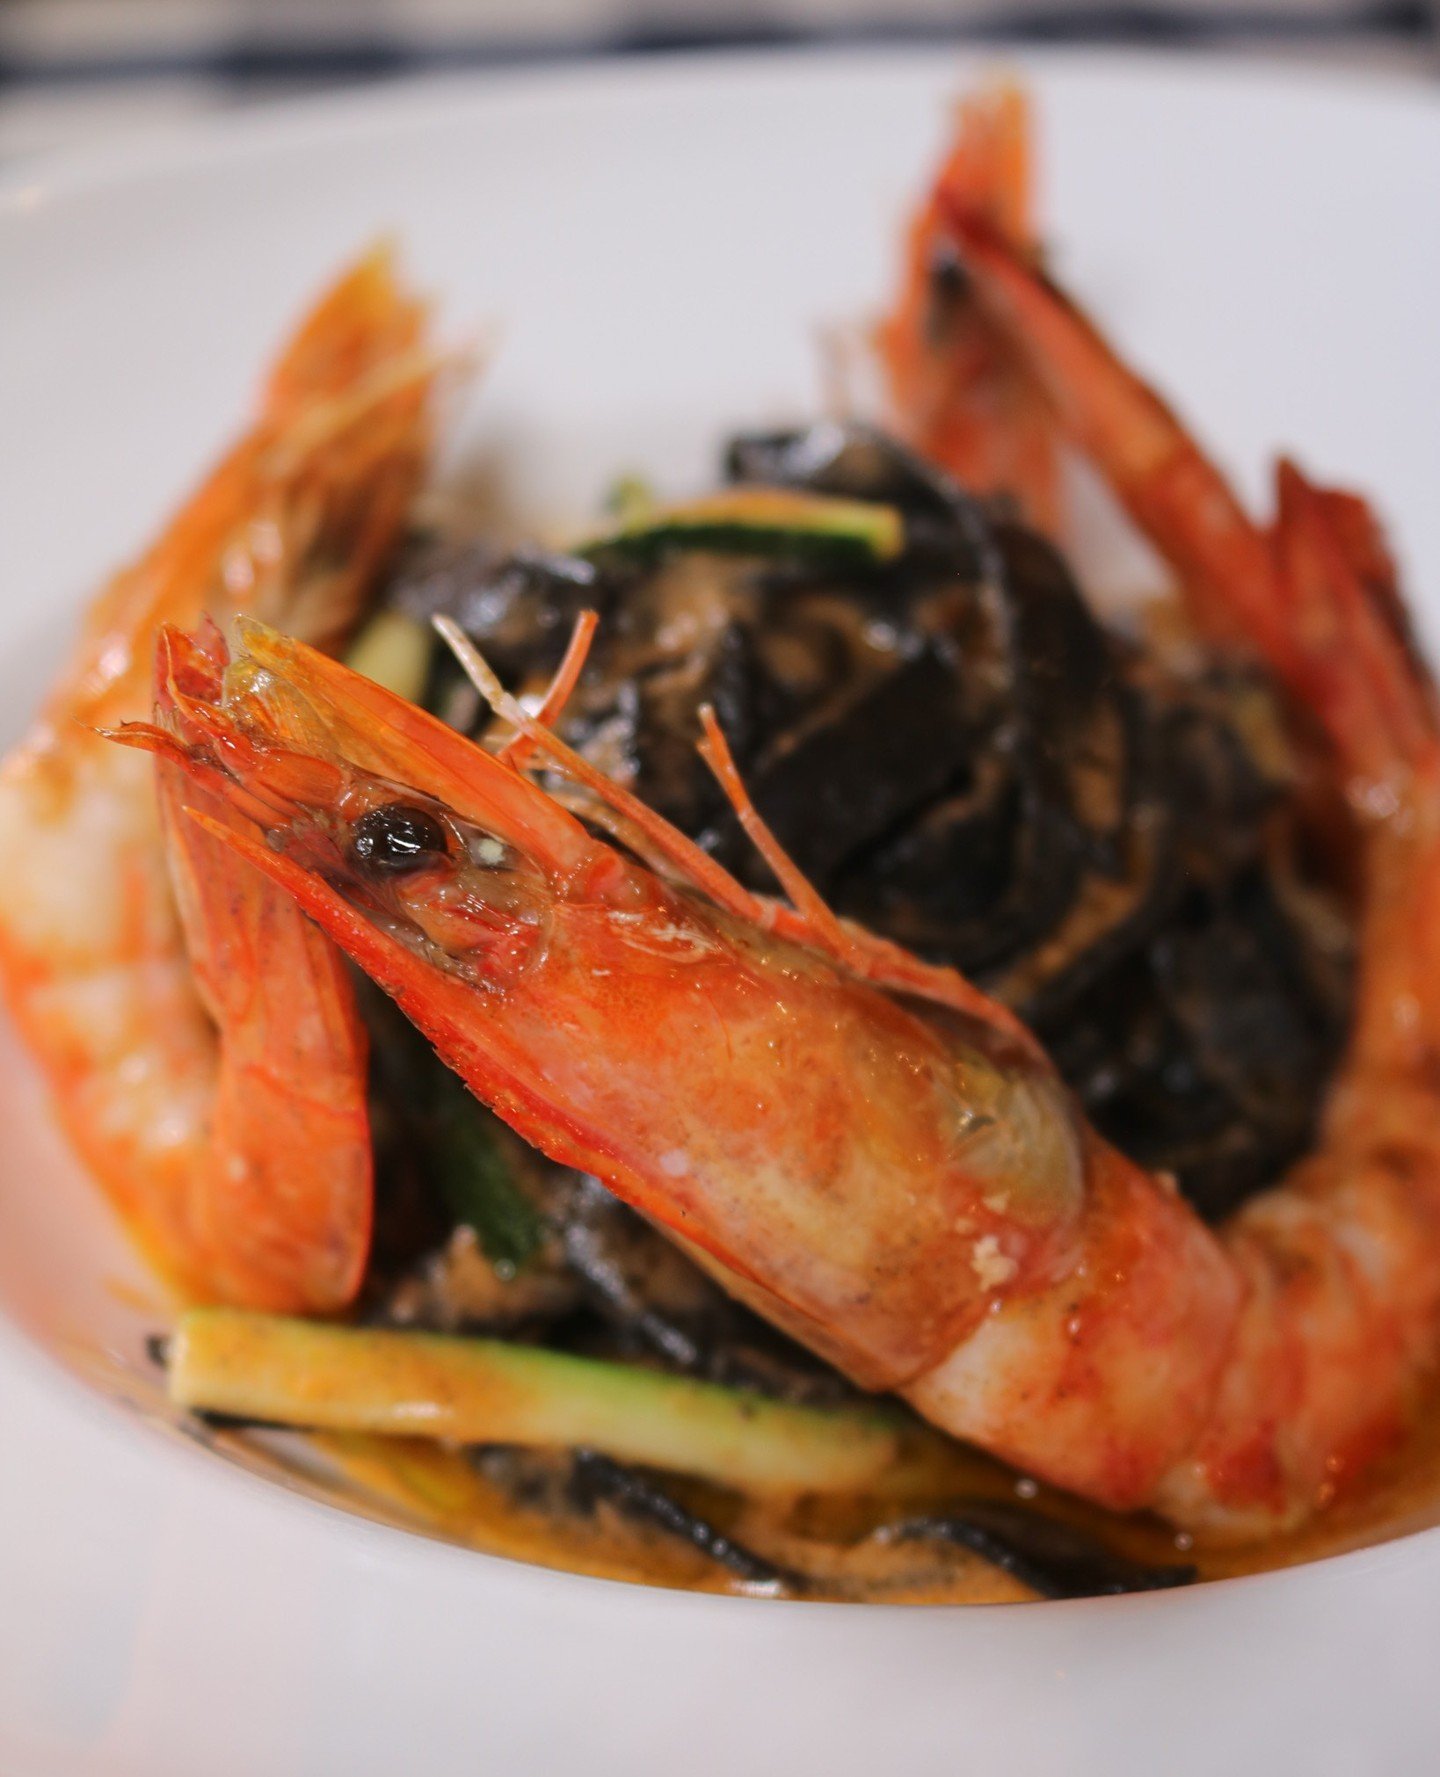 For those who love seafood, our Fettucine Al Nero is a must-try. Made with squid ink and juicy king prawns, along with courgette and a touch of chilli for that extra flavour!

#italianfoodlondon #londonfoodguide #italianrestaurantlondon #londoneats  